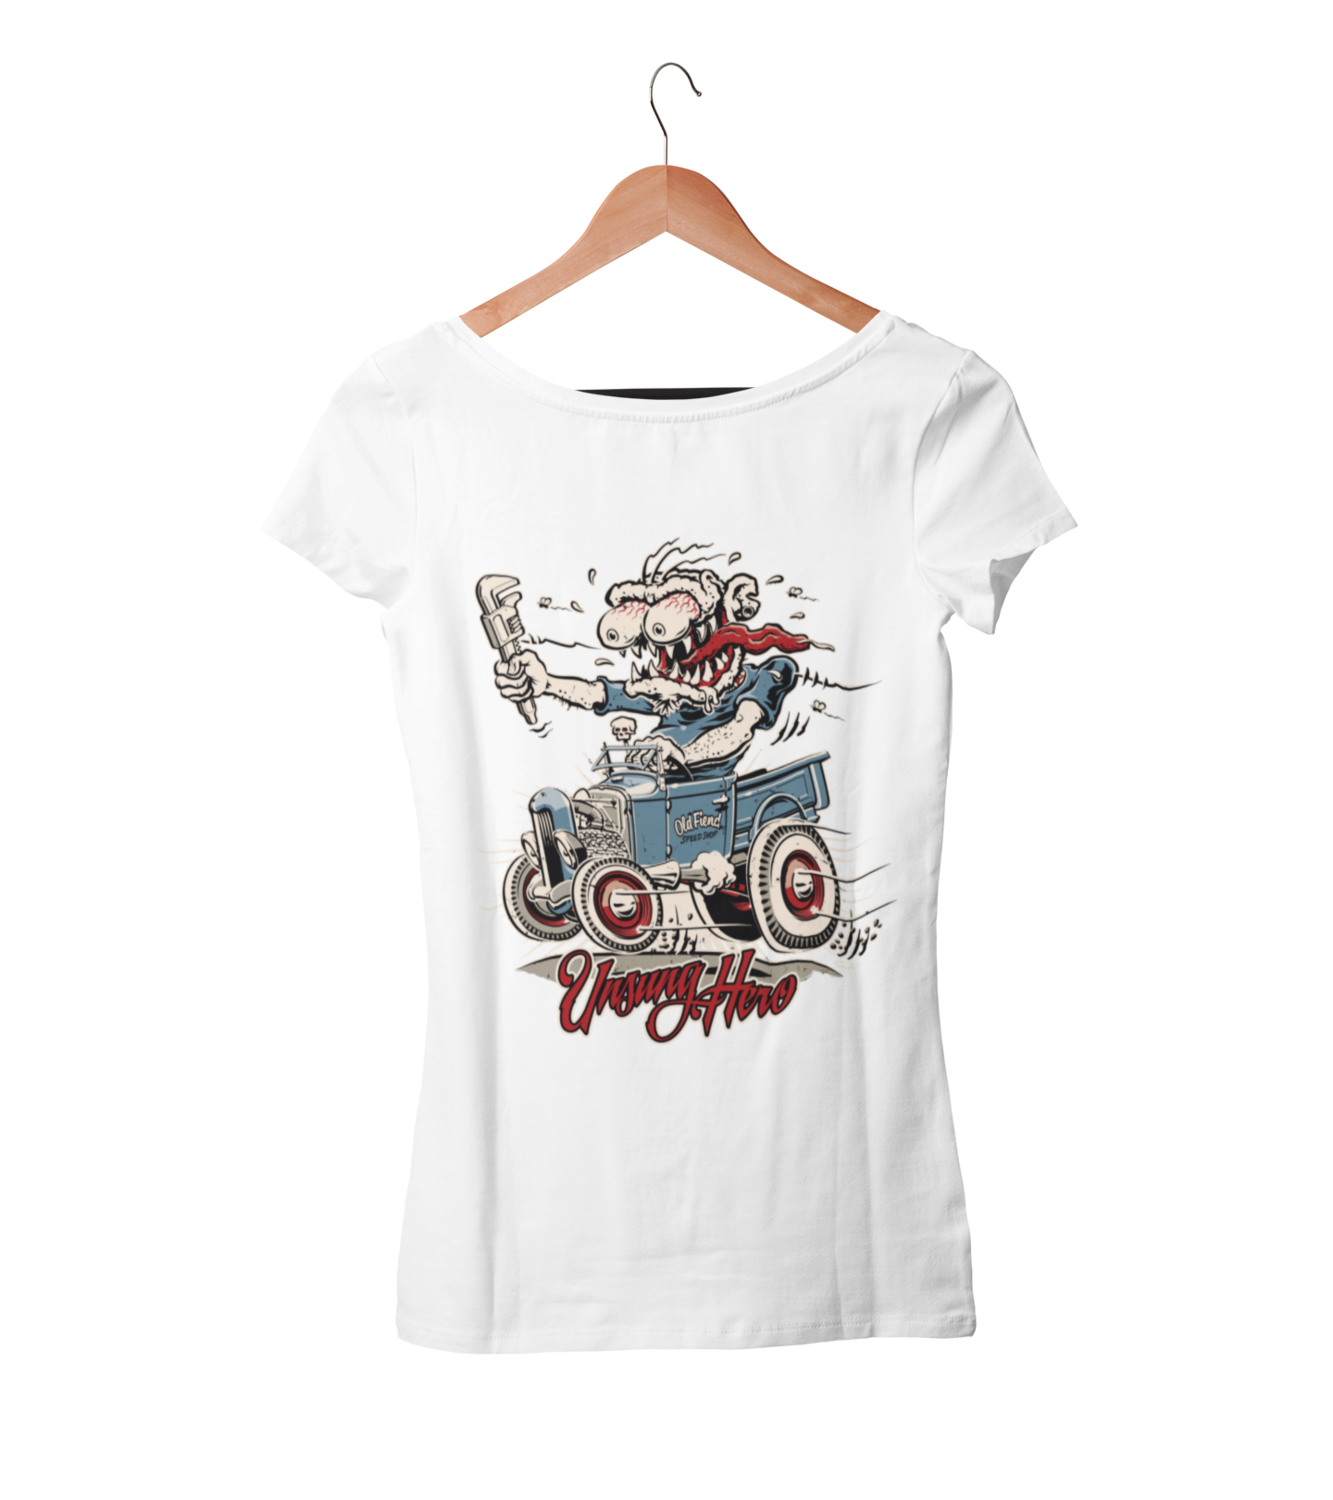 OLD FIEND MONKEY WRENCH T-SHIRT WOMAN by Ger "Dutch Courage" Peters artwork